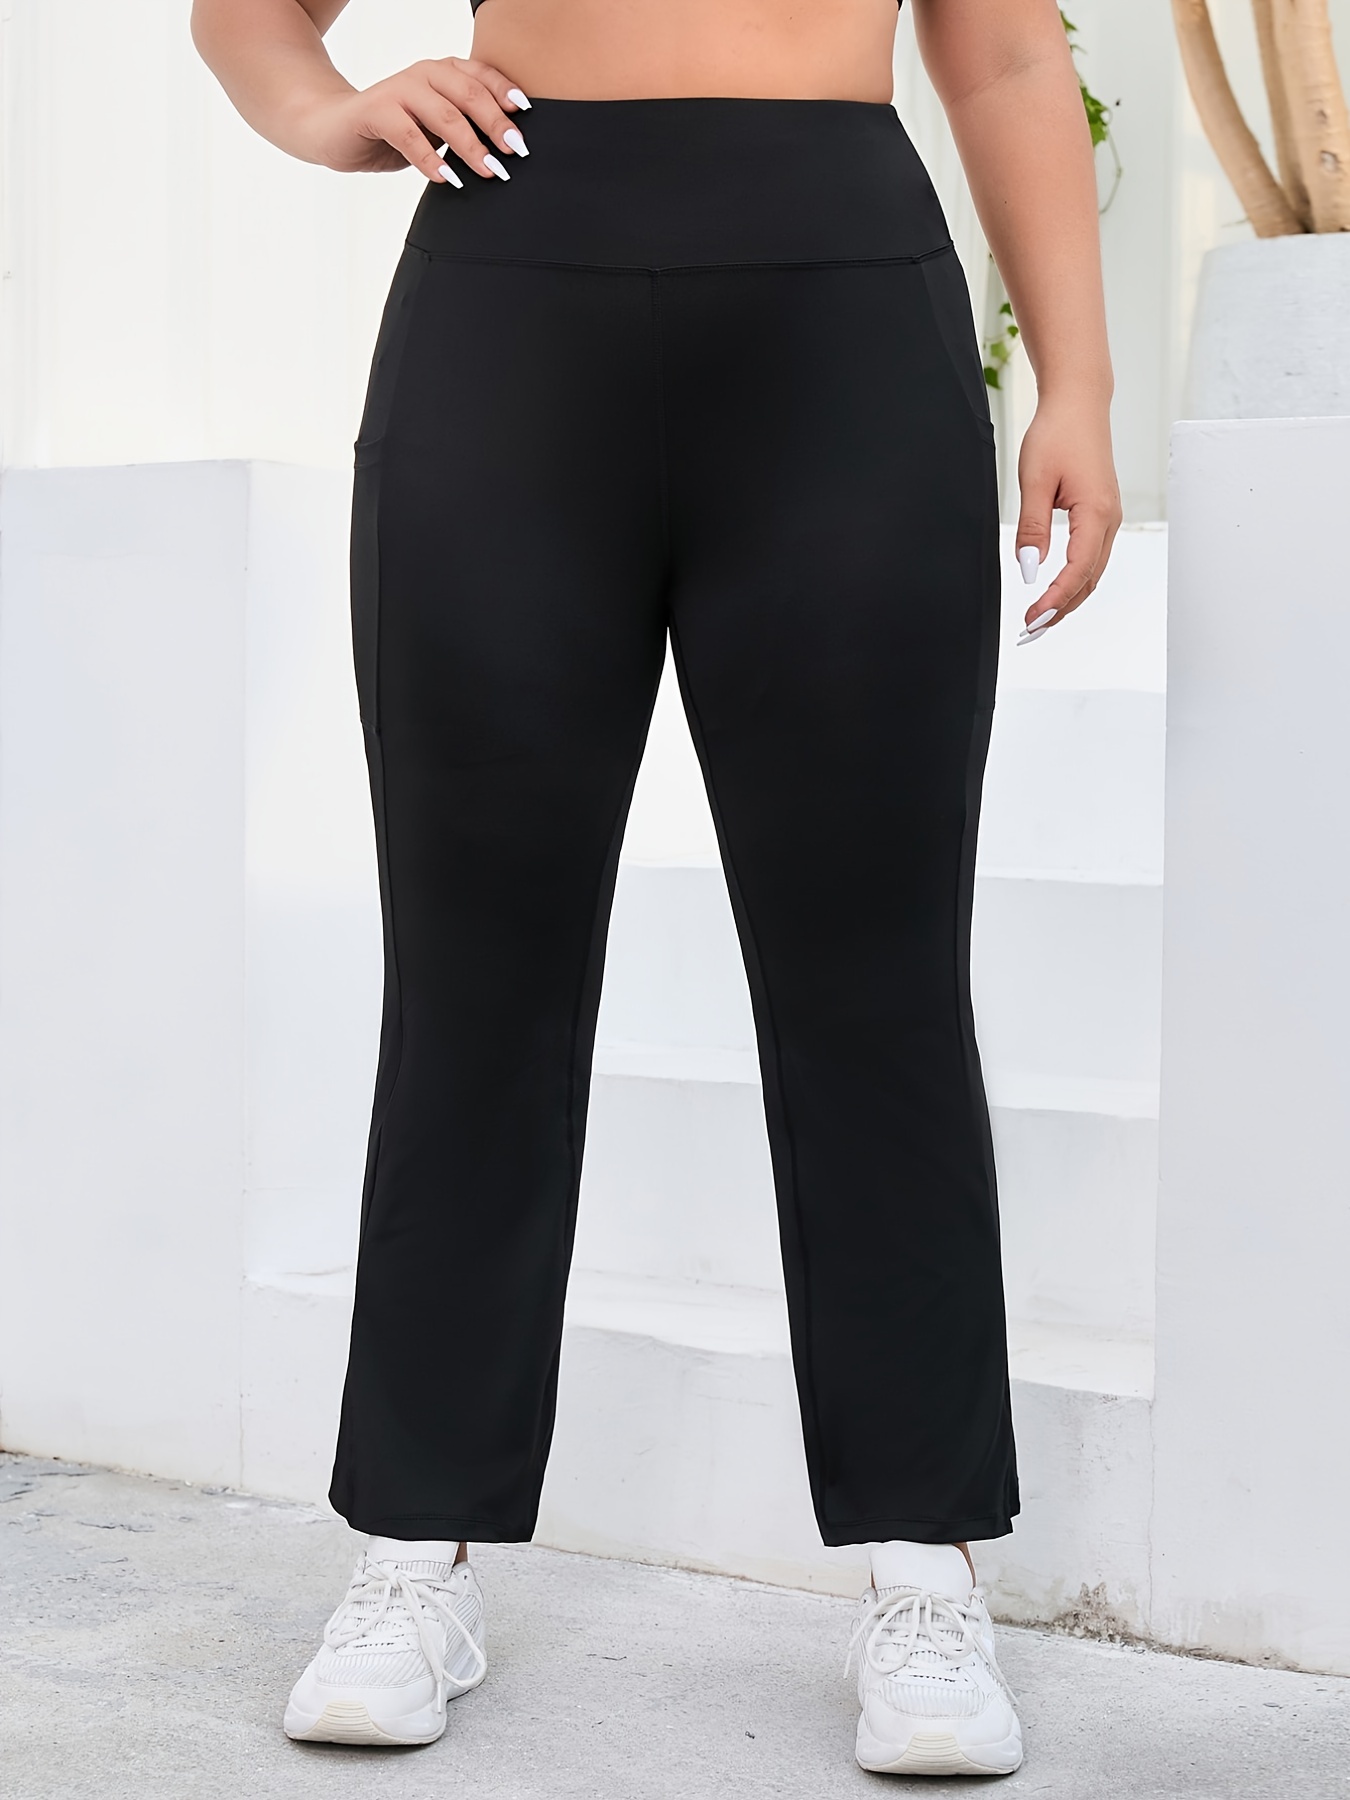 Split Pants Women Crossover Bootcut Yoga Pants High Waisted Full Length  Flare Workout Pants Bootleg Leggings With Pockets - AliExpress